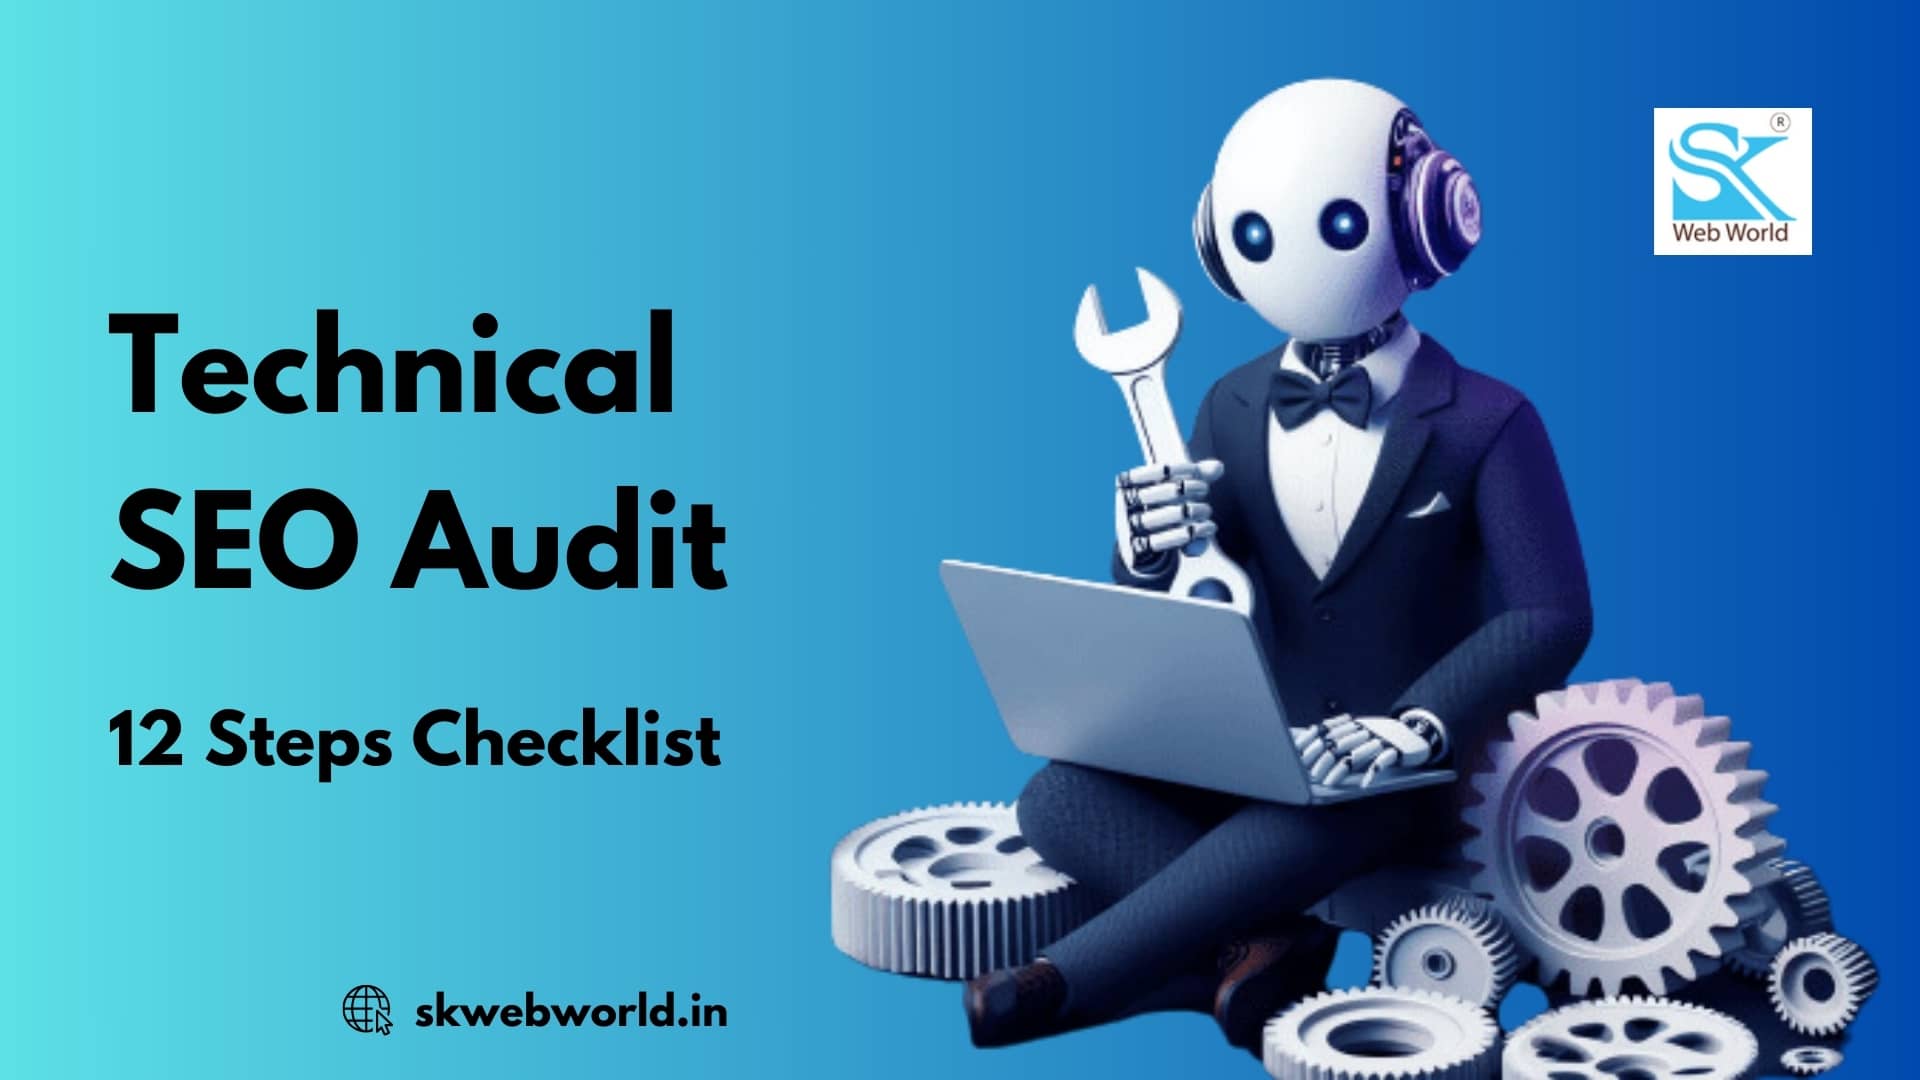 You are currently viewing The Definitive Guide to a Technical SEO Audit in 12 Steps